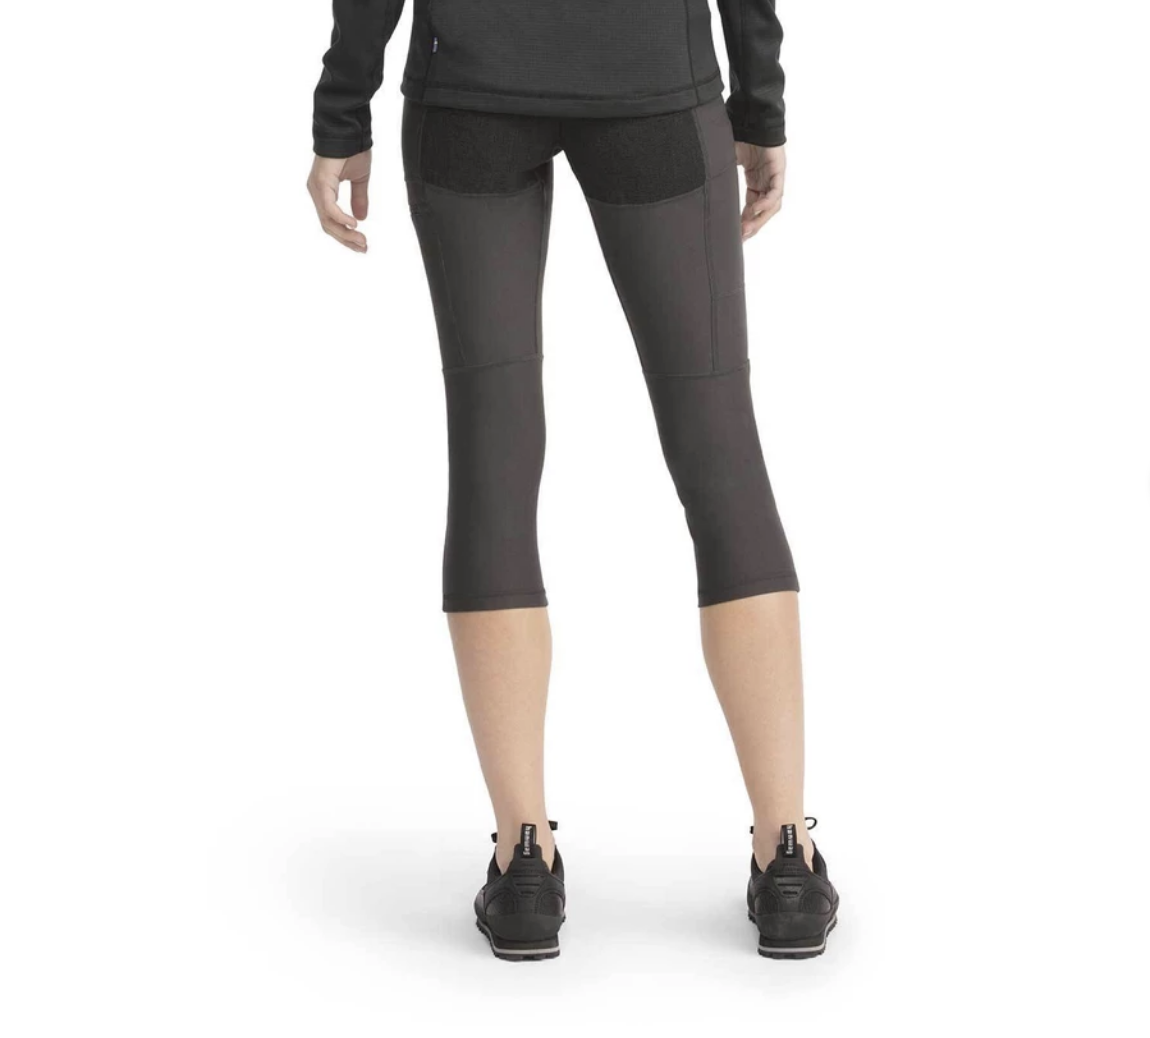 Fjallraven Abisko Trail Tights - Ladies from Humes Outfitters